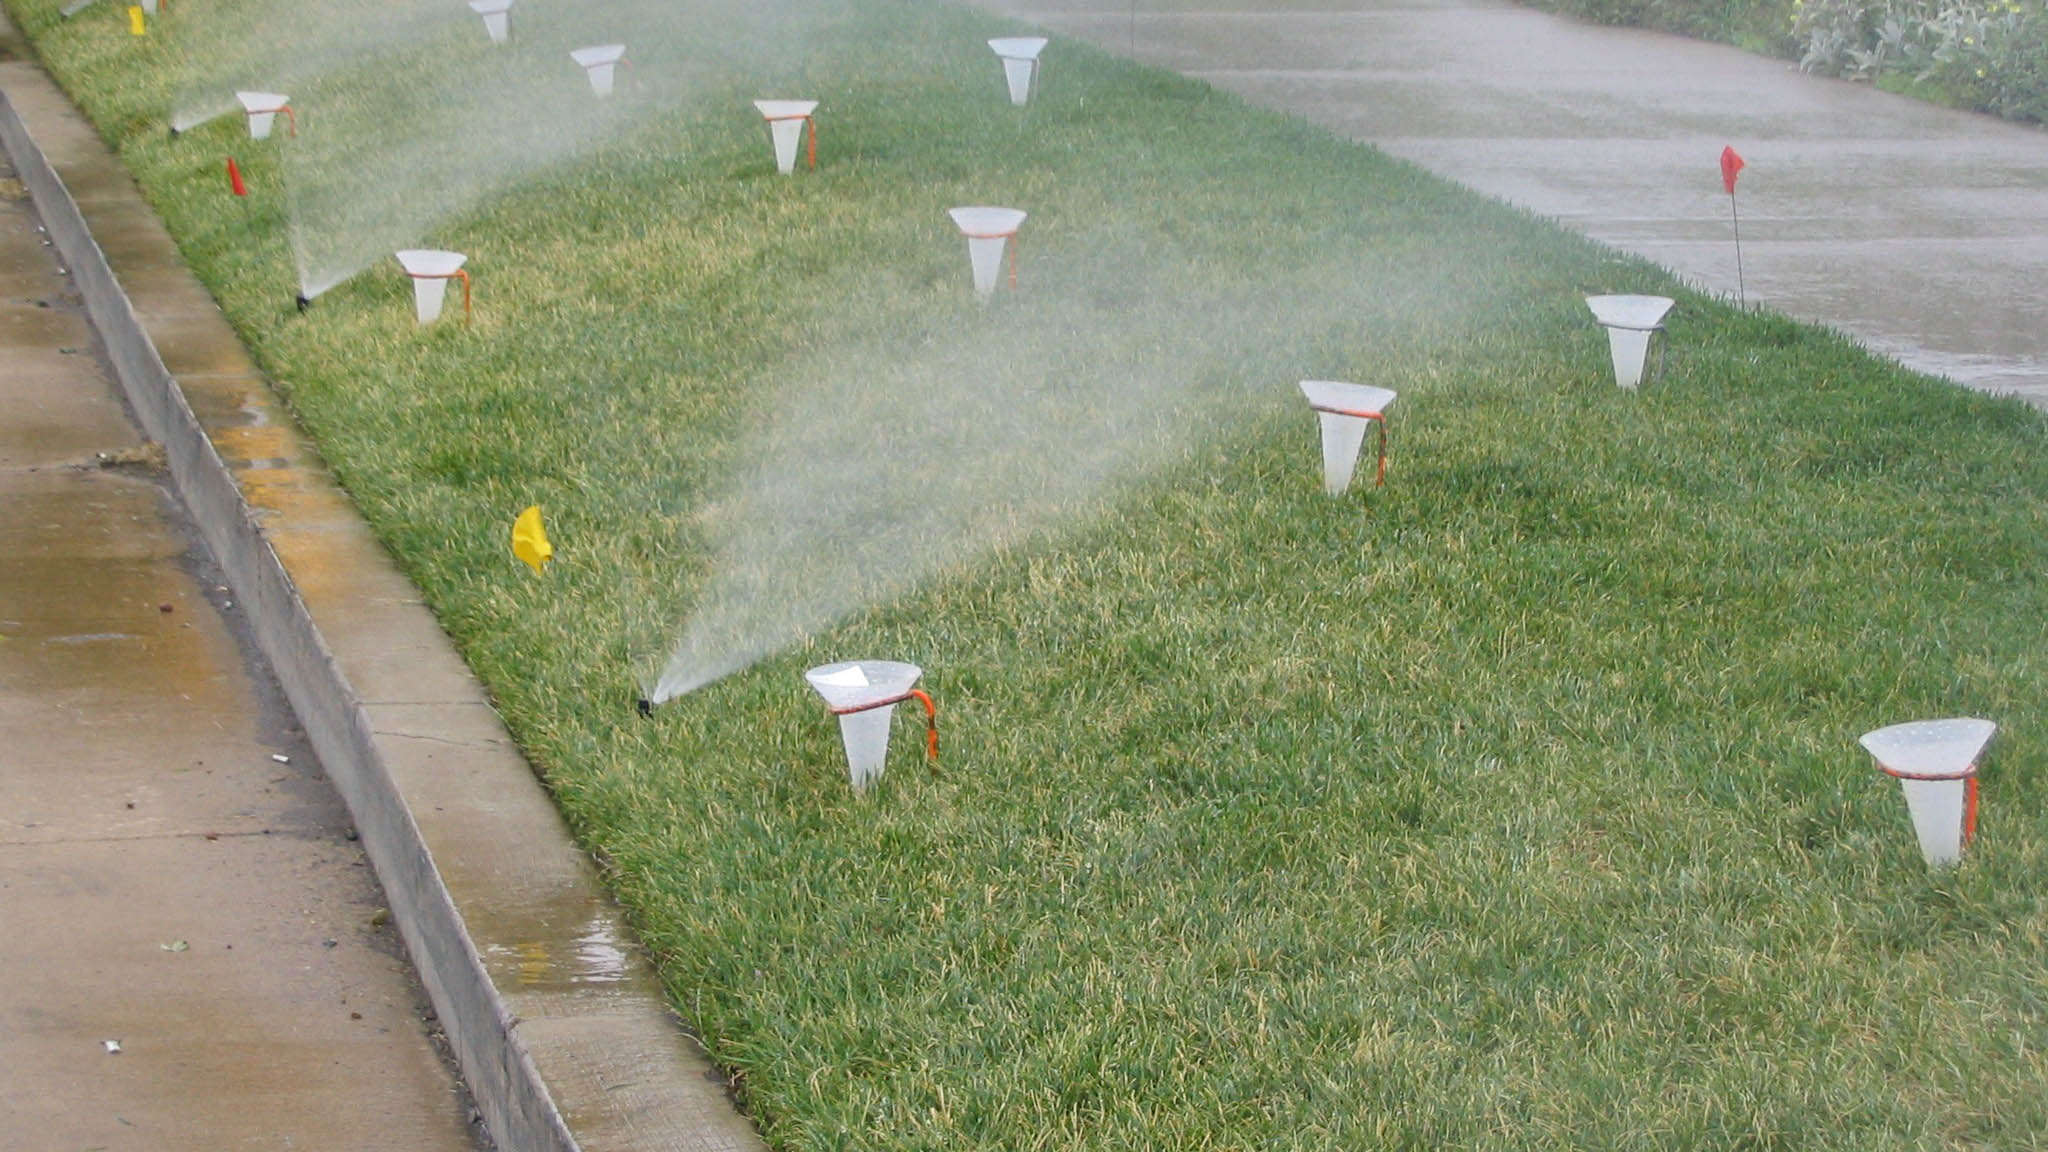 Catch cups used during irrigation audit